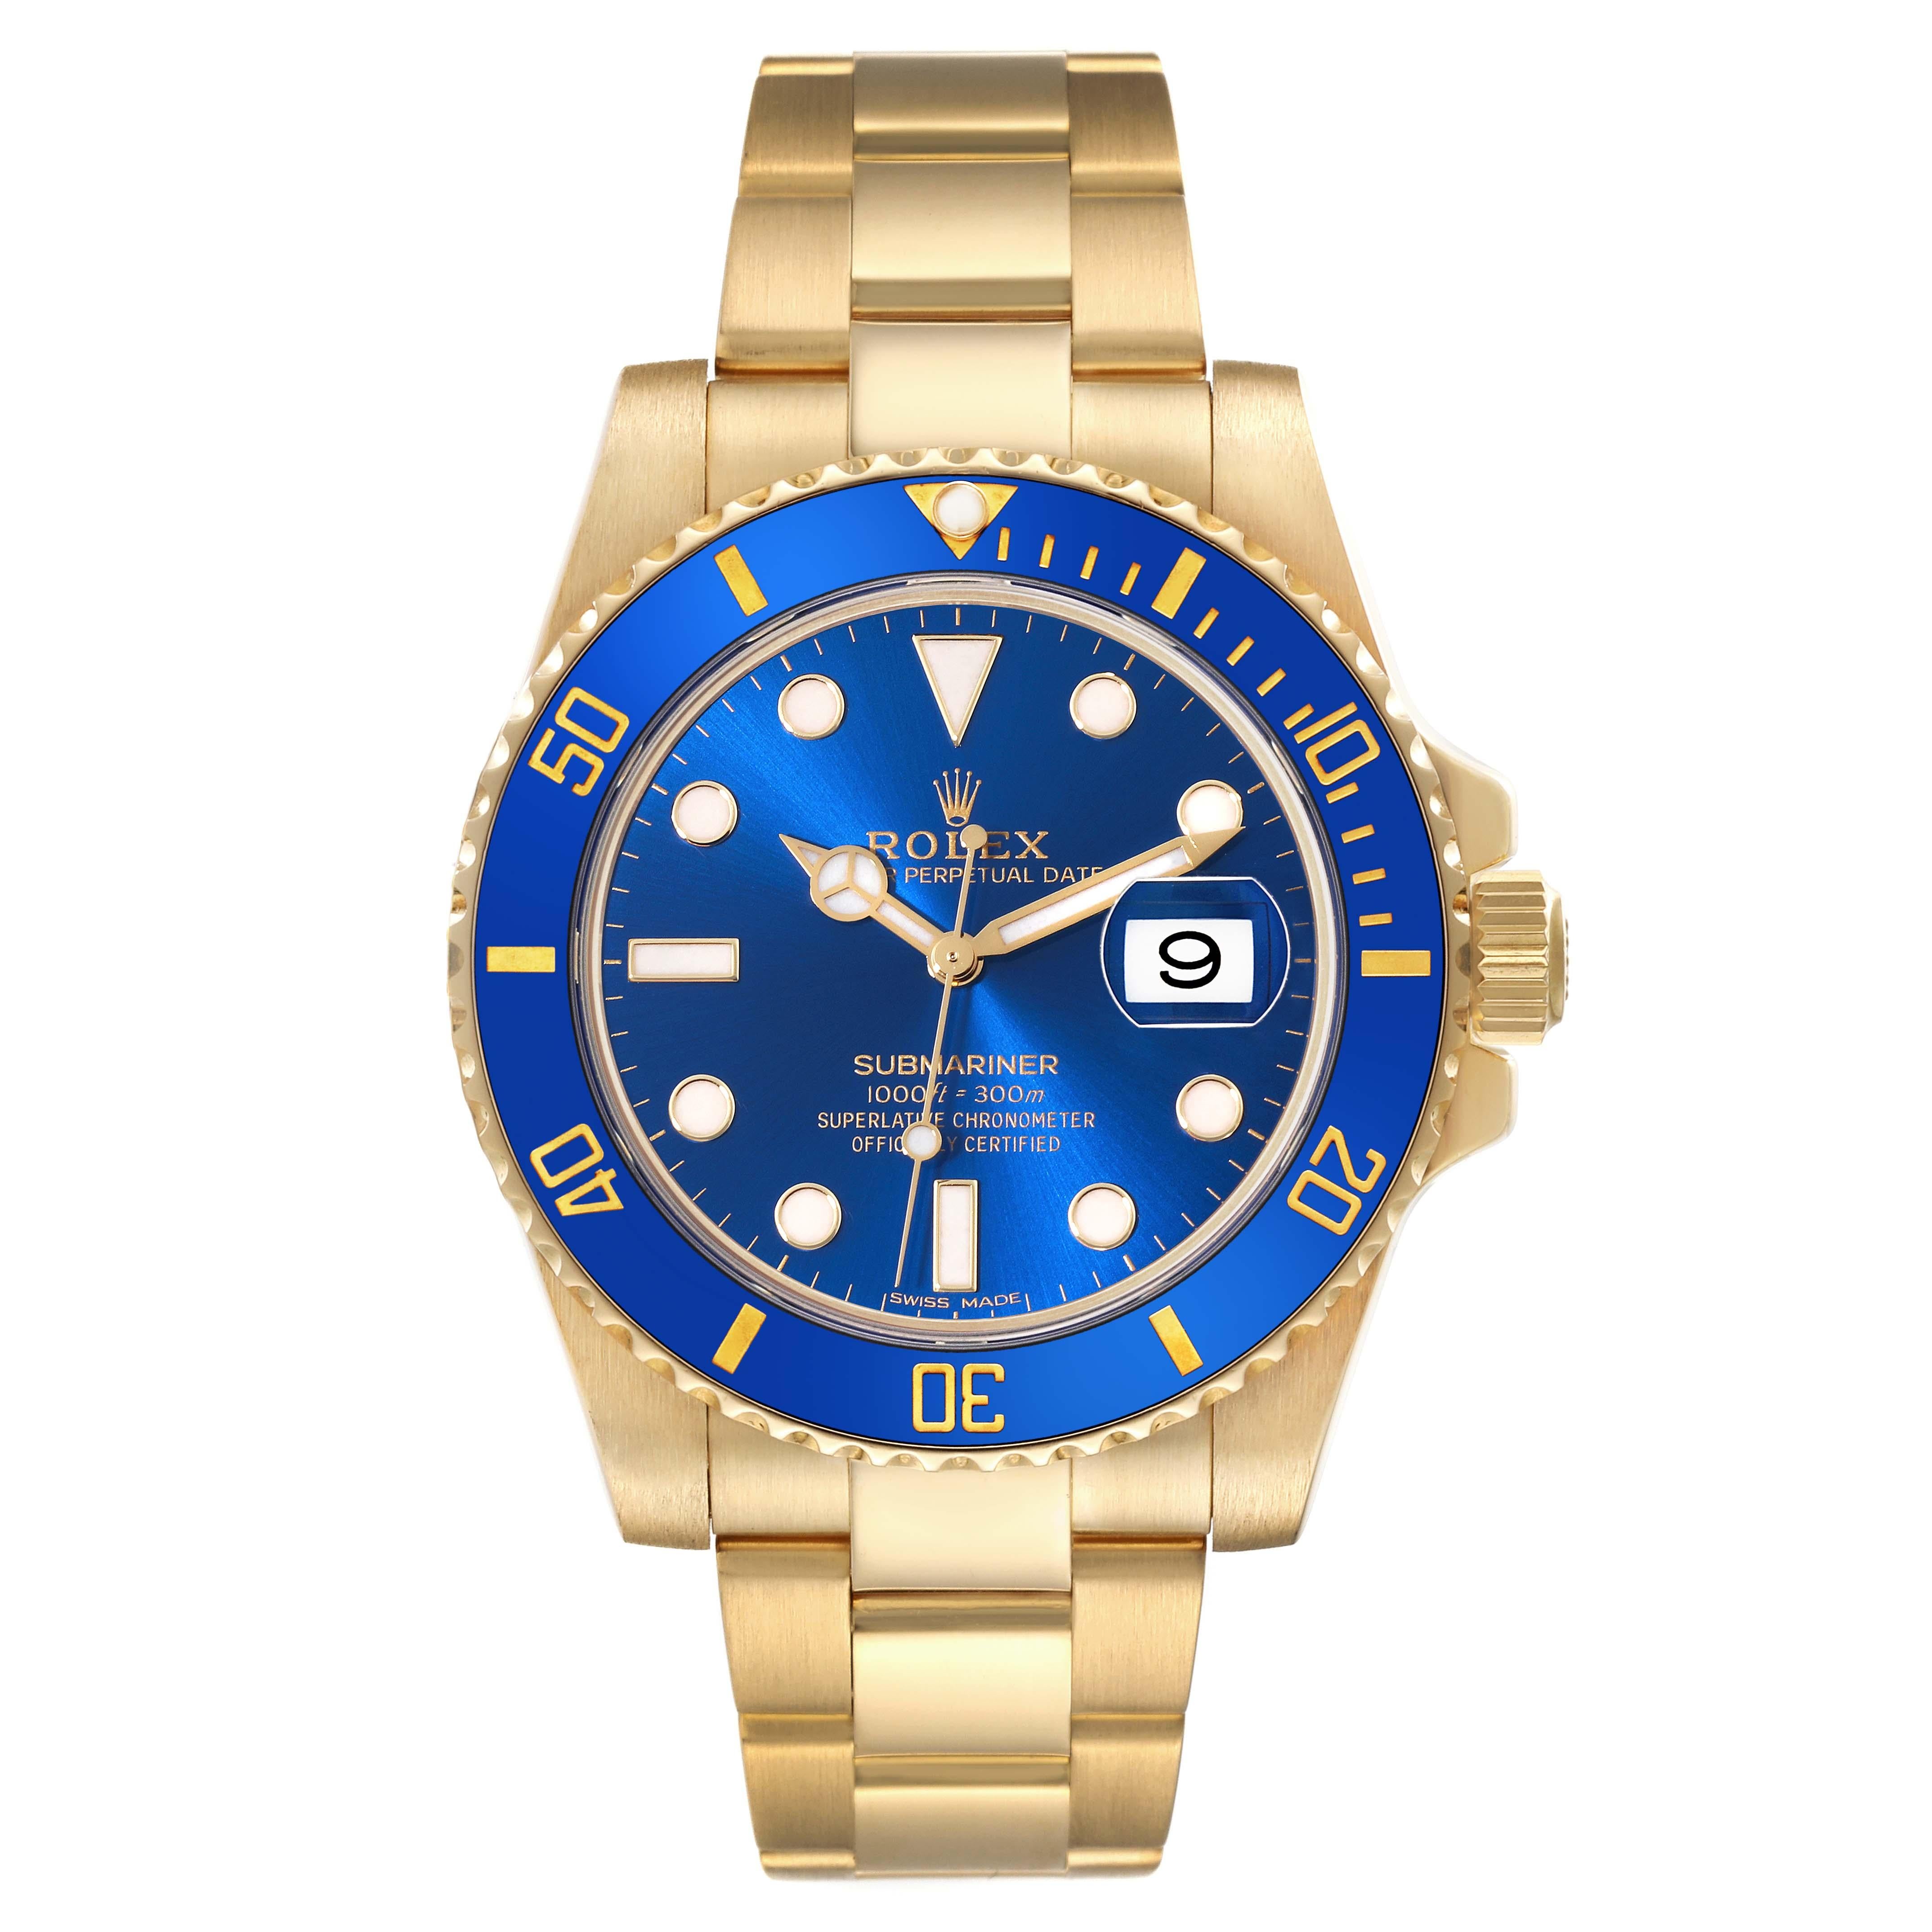 Rolex Submariner Yellow Gold Blue Dial Ceramic Bezel Mens Watch 116618 Box Card In Excellent Condition For Sale In Atlanta, GA